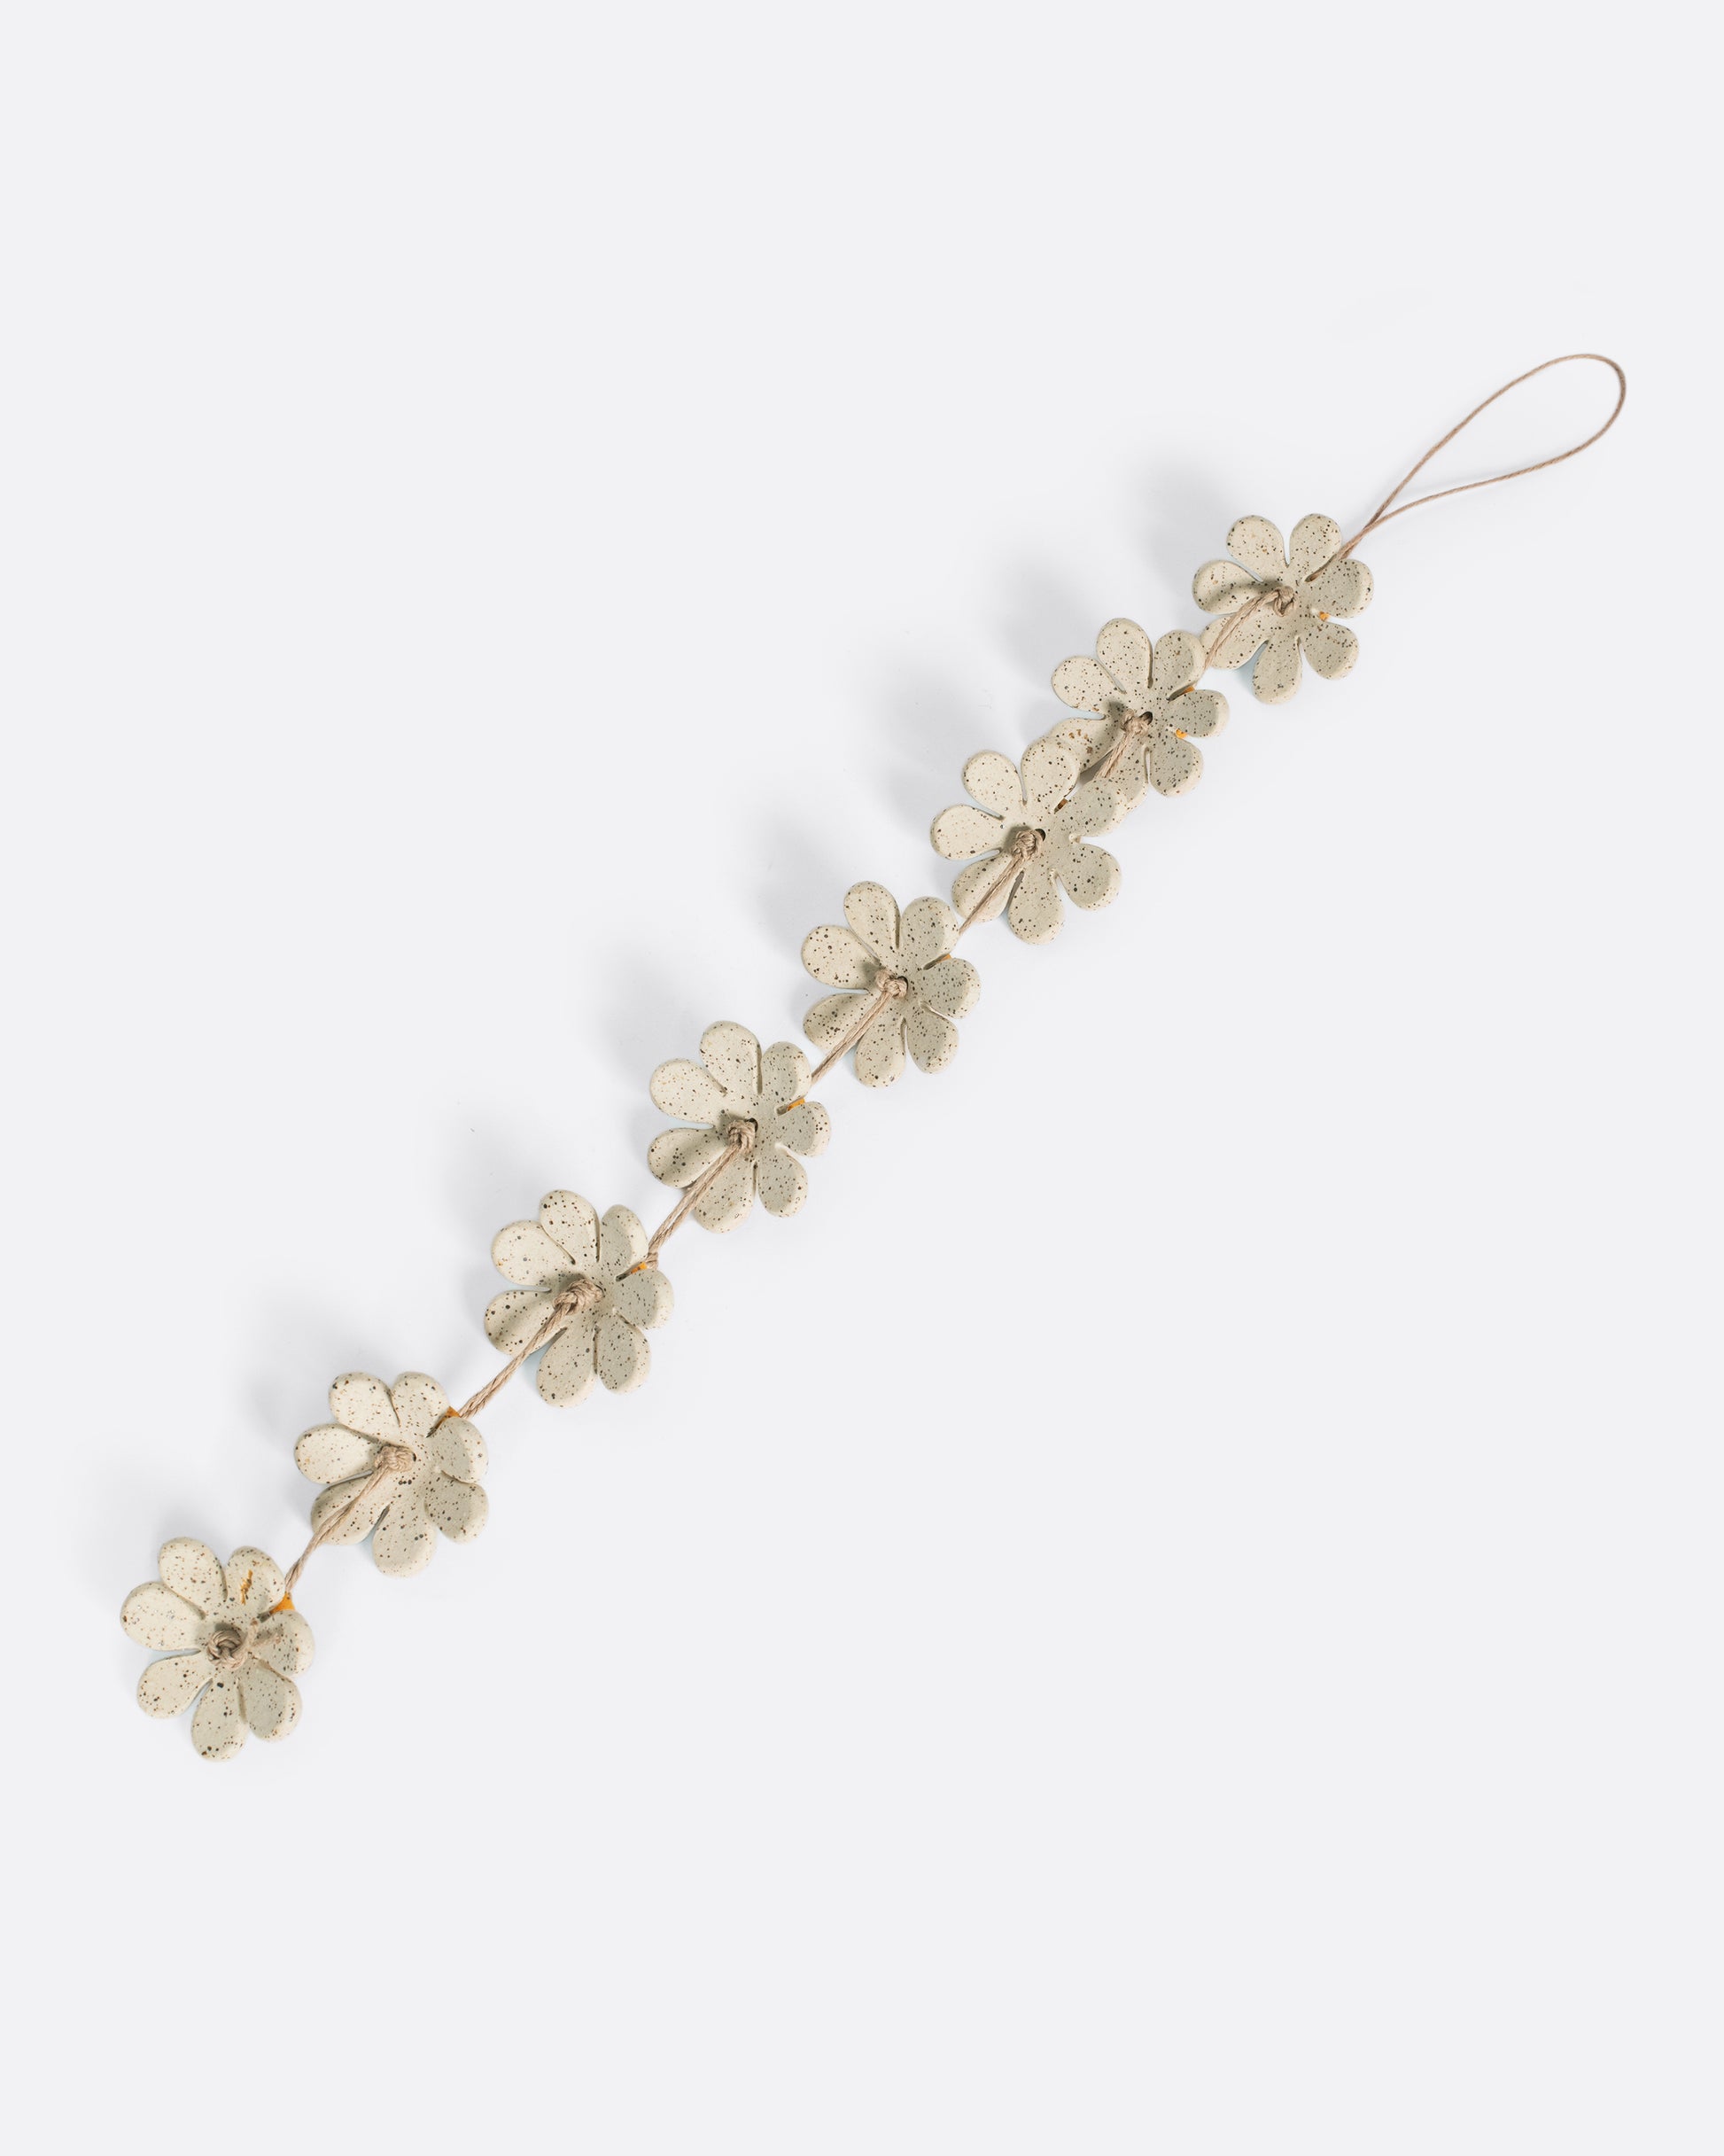 This daisy chain ceramic garland adds a burst of sunshine to any corner, window, or kids room. They look especially sweet hanging in a cluster like a mobile over a crib.